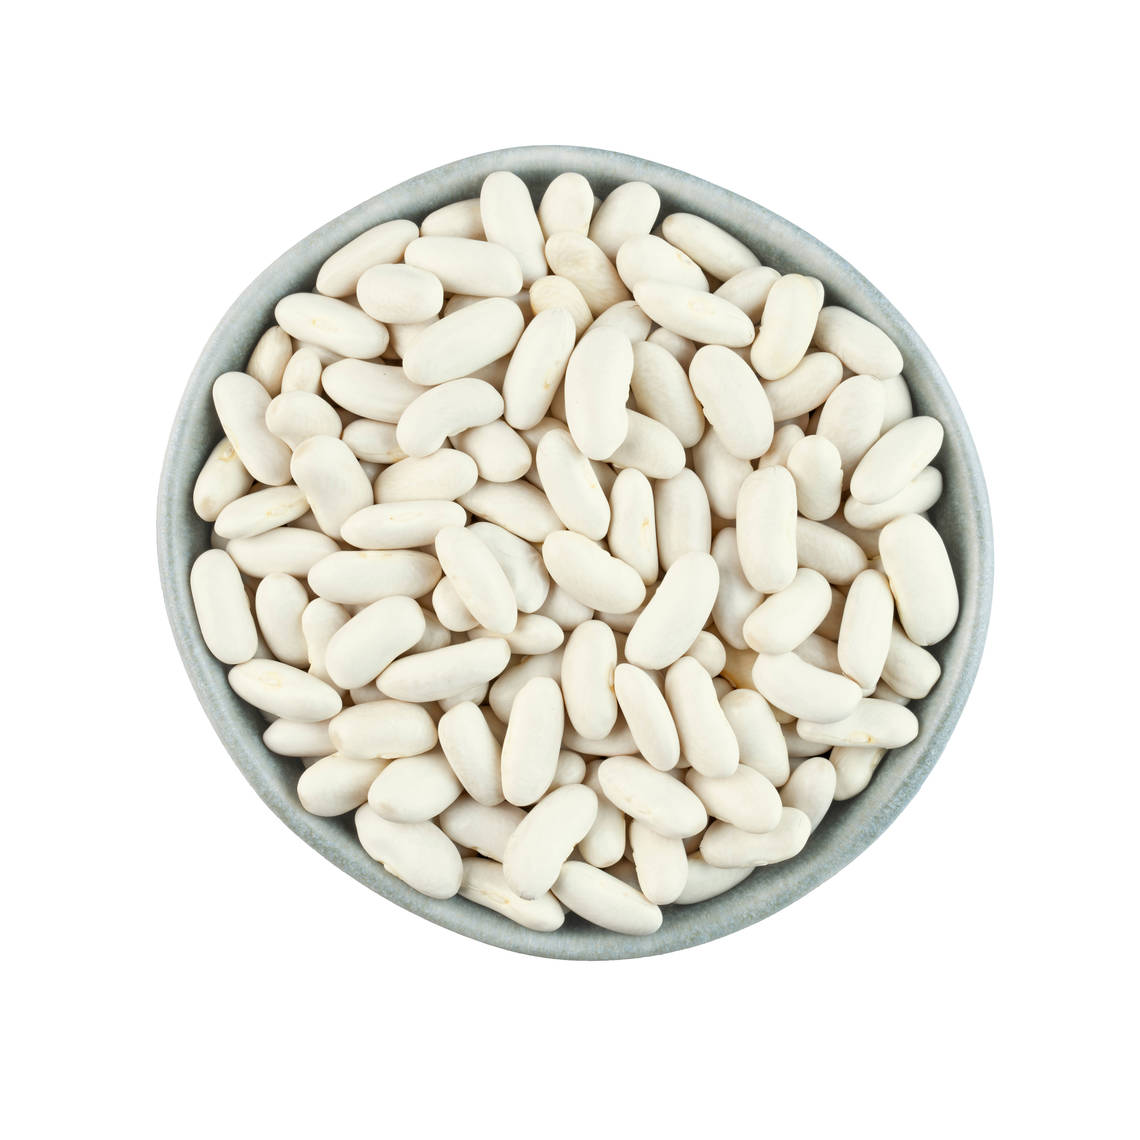 Cannellini beans or alubia blanca in Spanish, are white, large kidney shaped beans with a slightly nutty, mild flavour and soft texture. 